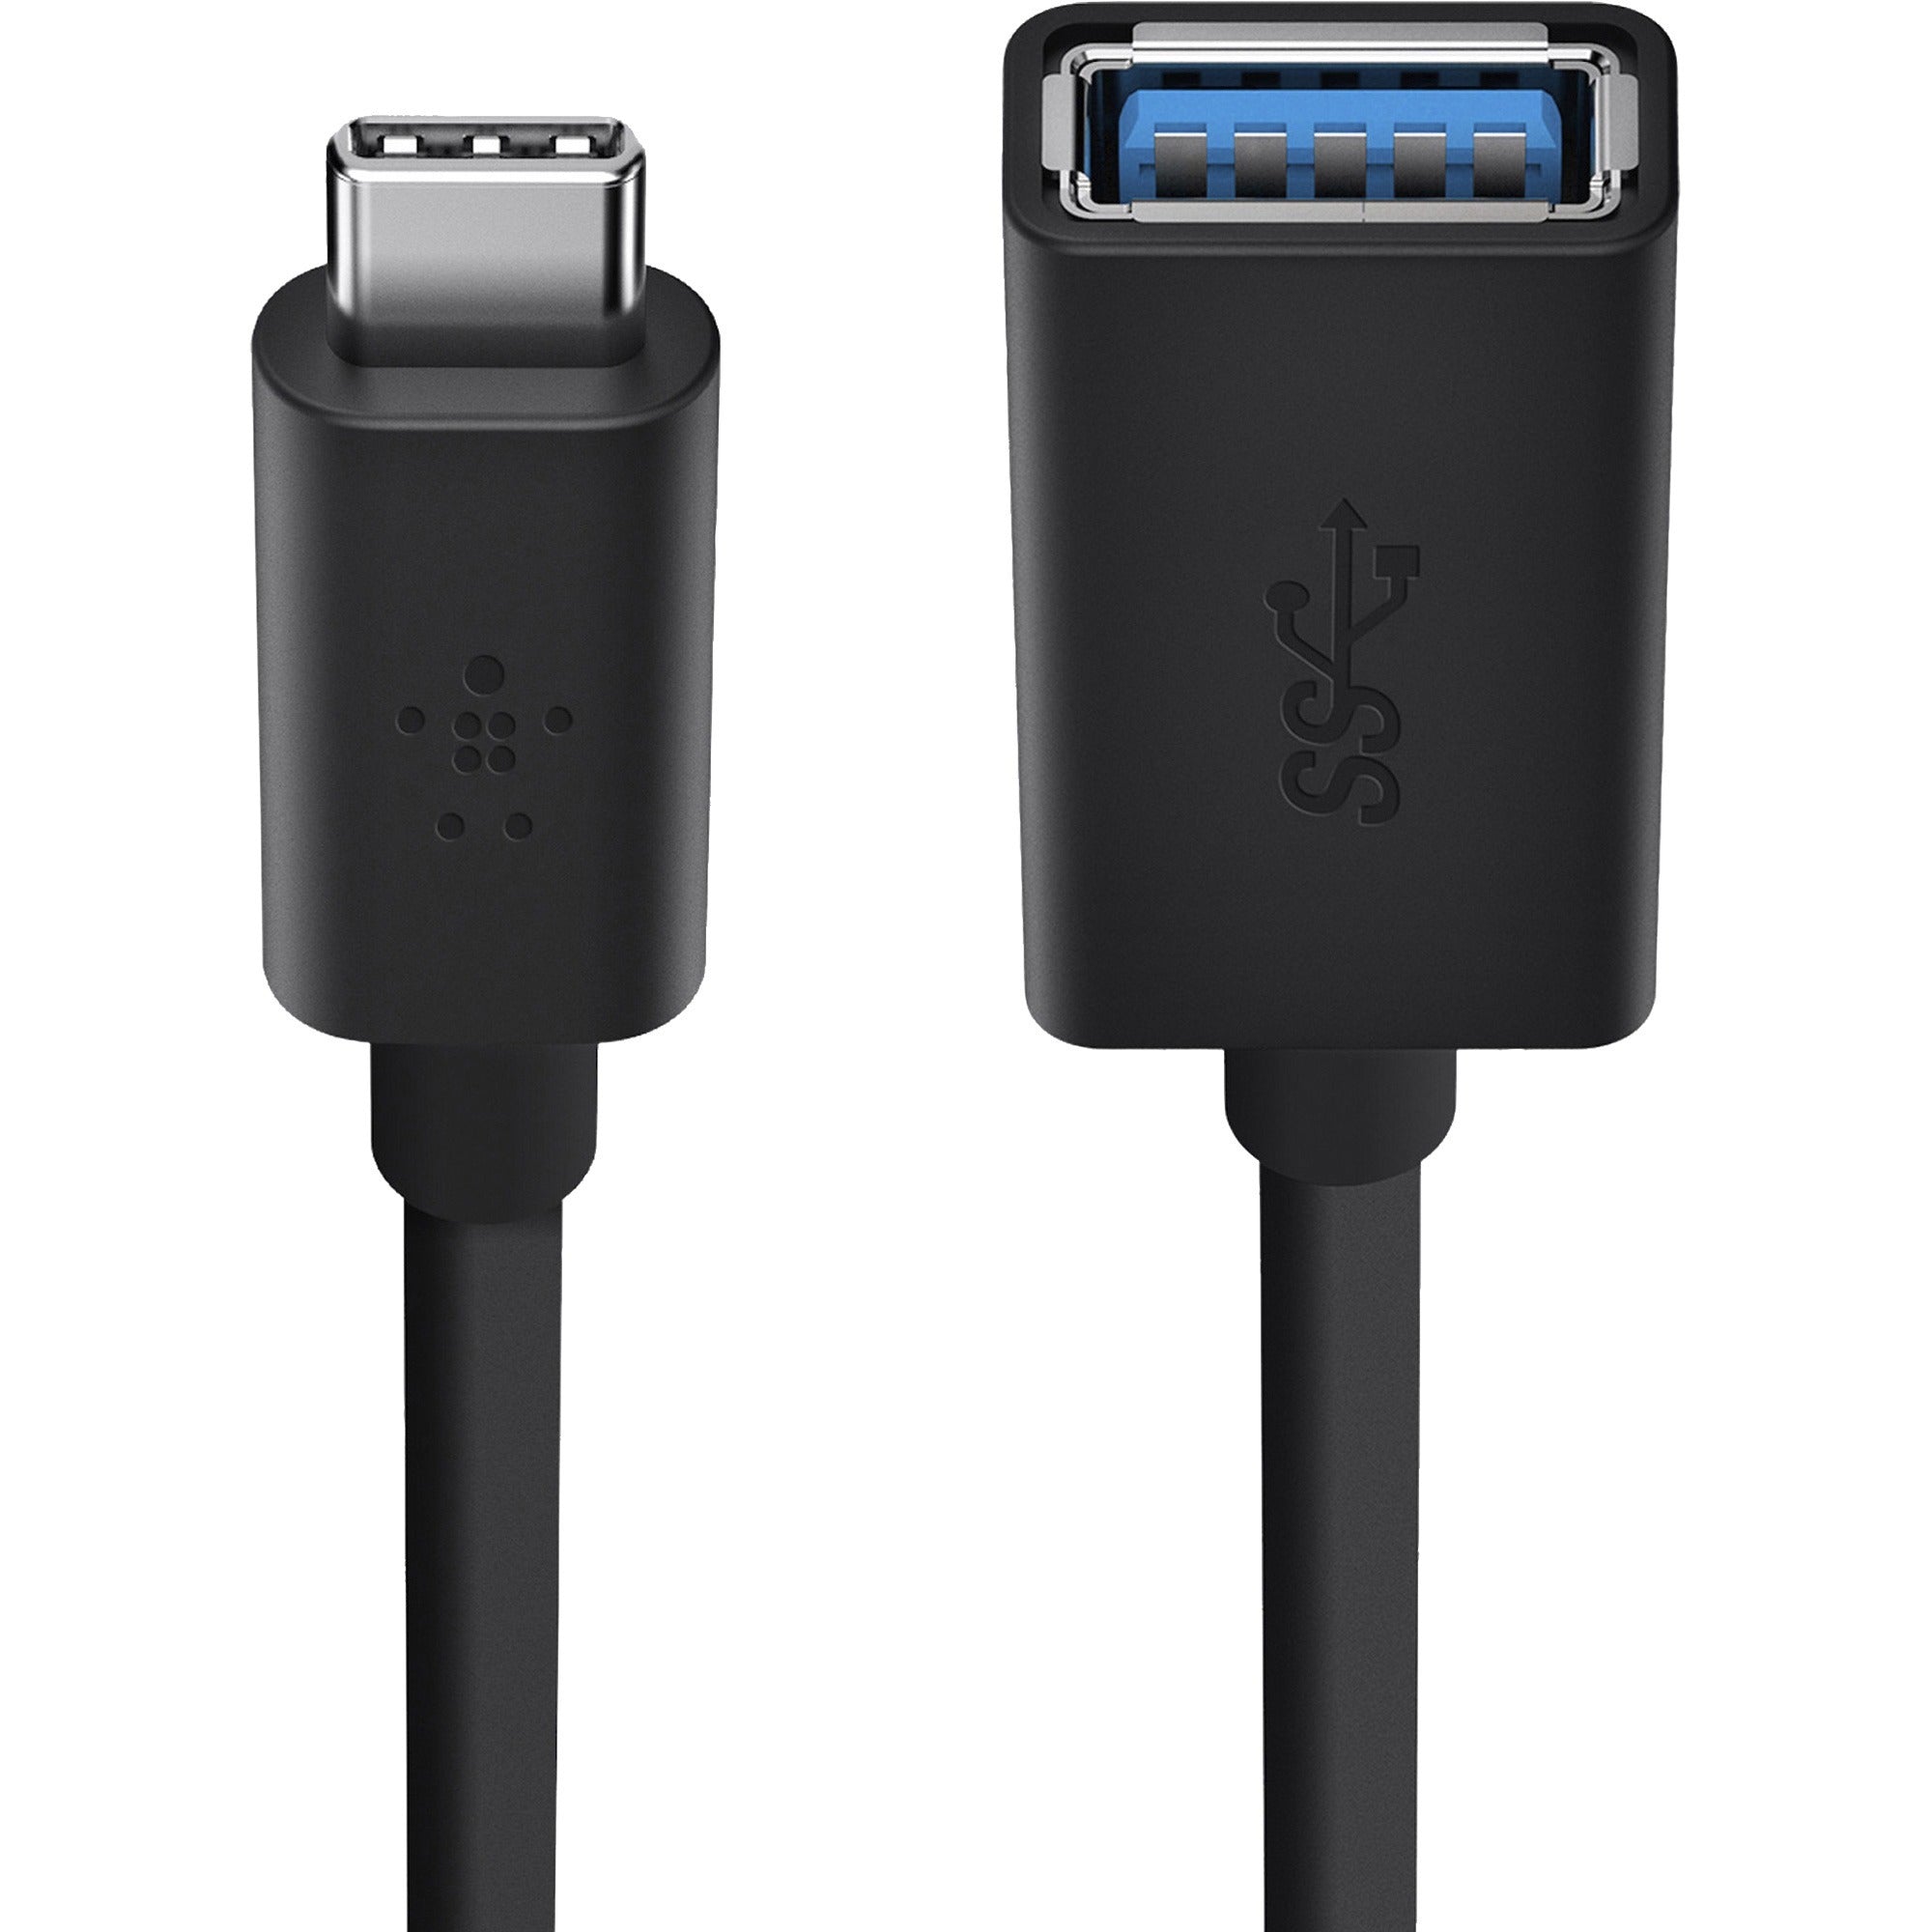 belkin-sync-charge-usb-data-transfer-cable-6-usb-data-transfer-cable-for-flash-drive-keyboard-mouse-first-end-1-x-usb-30-type-a-male-second-end-1-x-usb-30-type-c-male-5-gbit-s-black-1-each_blkb2b150blk - 2